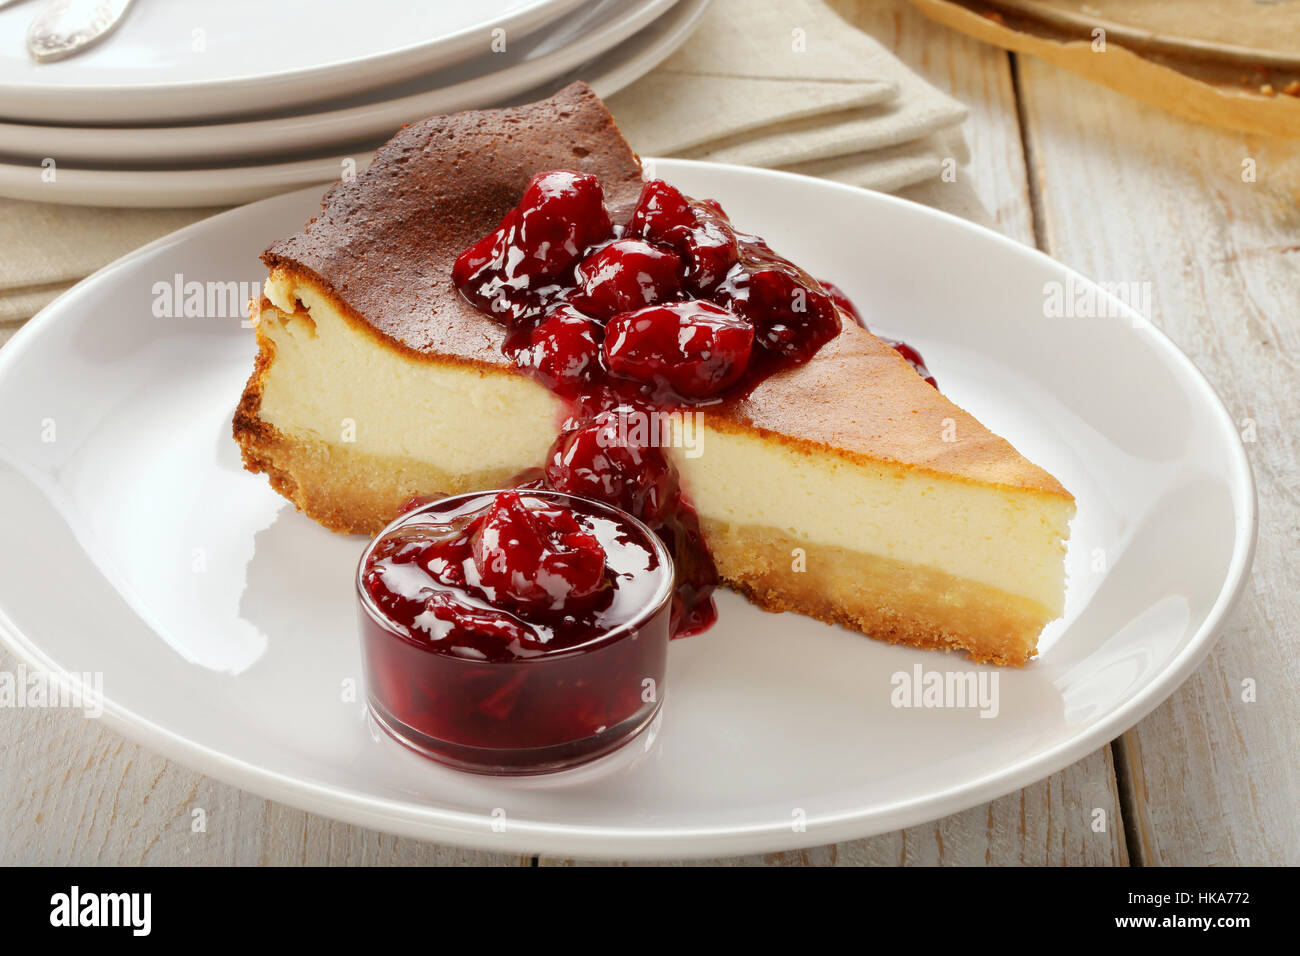 Cheesecake slice with cherry jam on wooden background Stock Photo